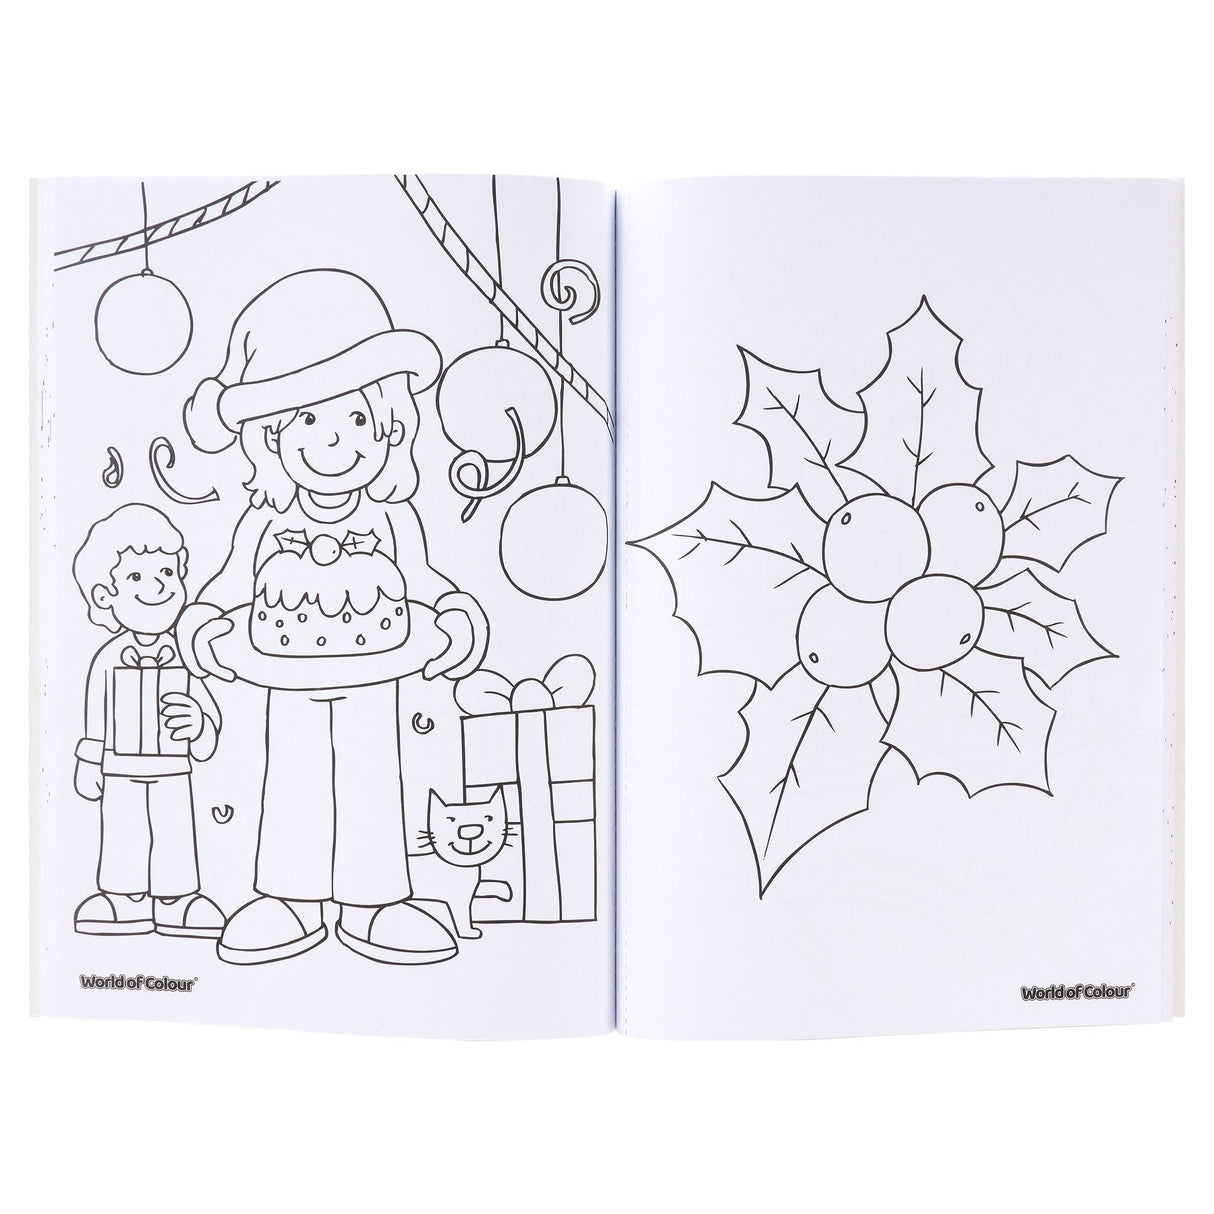 World of Colour A4 Perforated Colouring Book - Festive Fun - 96 Pages - Christmas-Kids Colouring Books-World of Colour|StationeryShop.co.uk